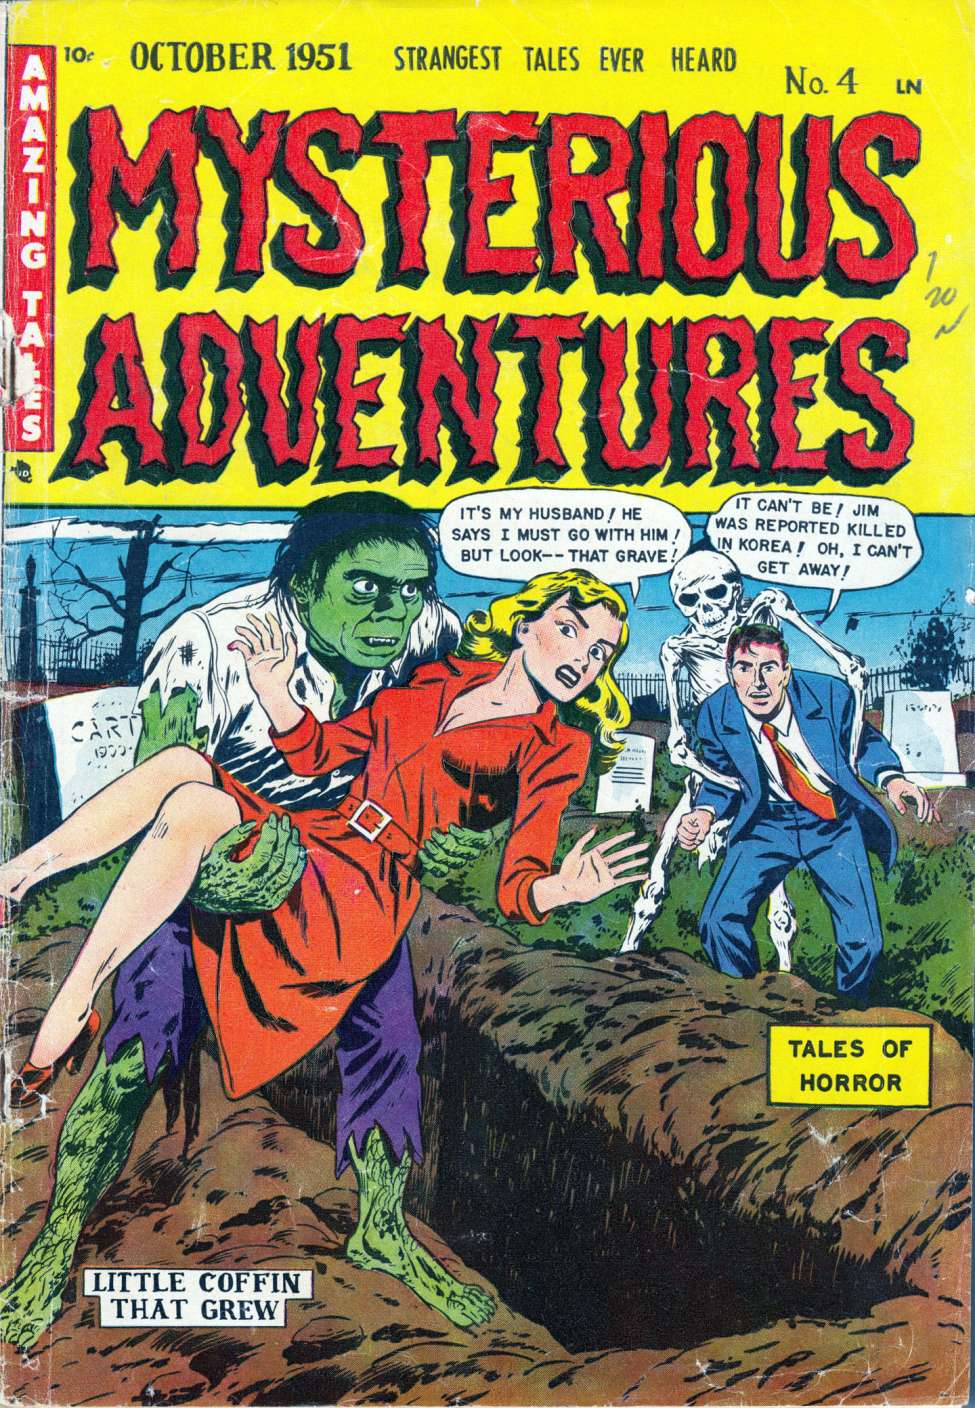 Book Cover For Mysterious Adventures 4 (alt) - Version 2